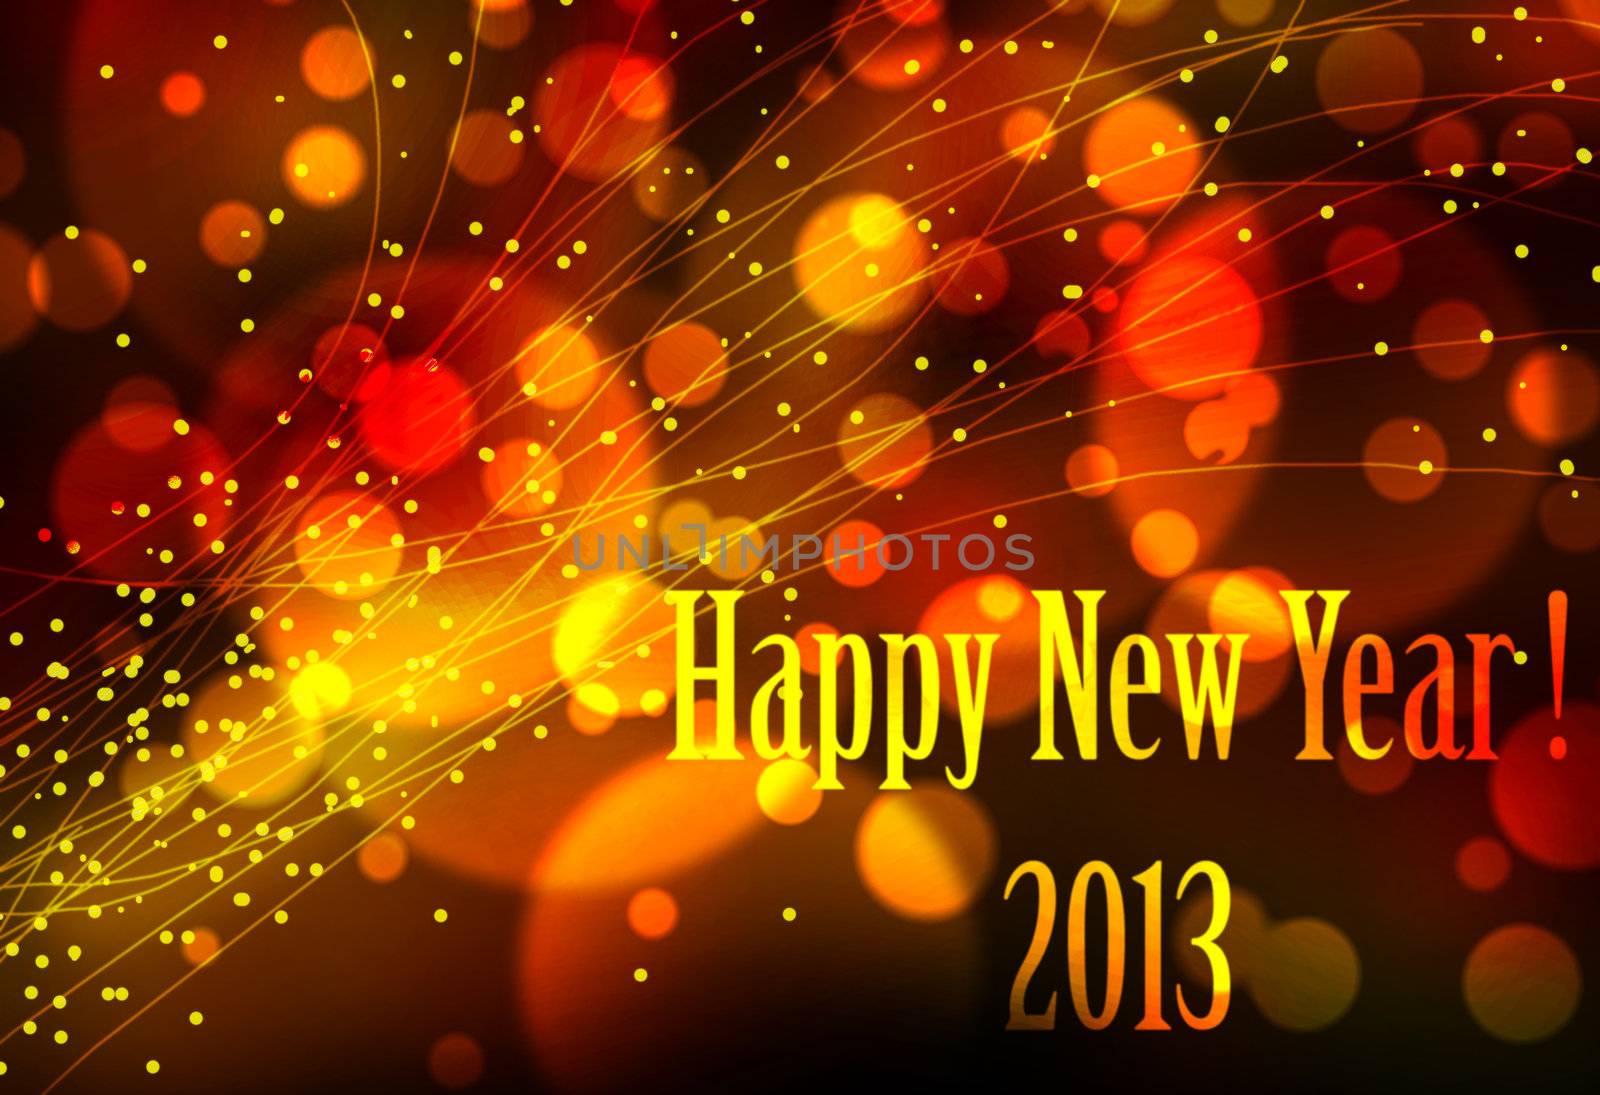 Happy new year 2013 card or background by Mirage3